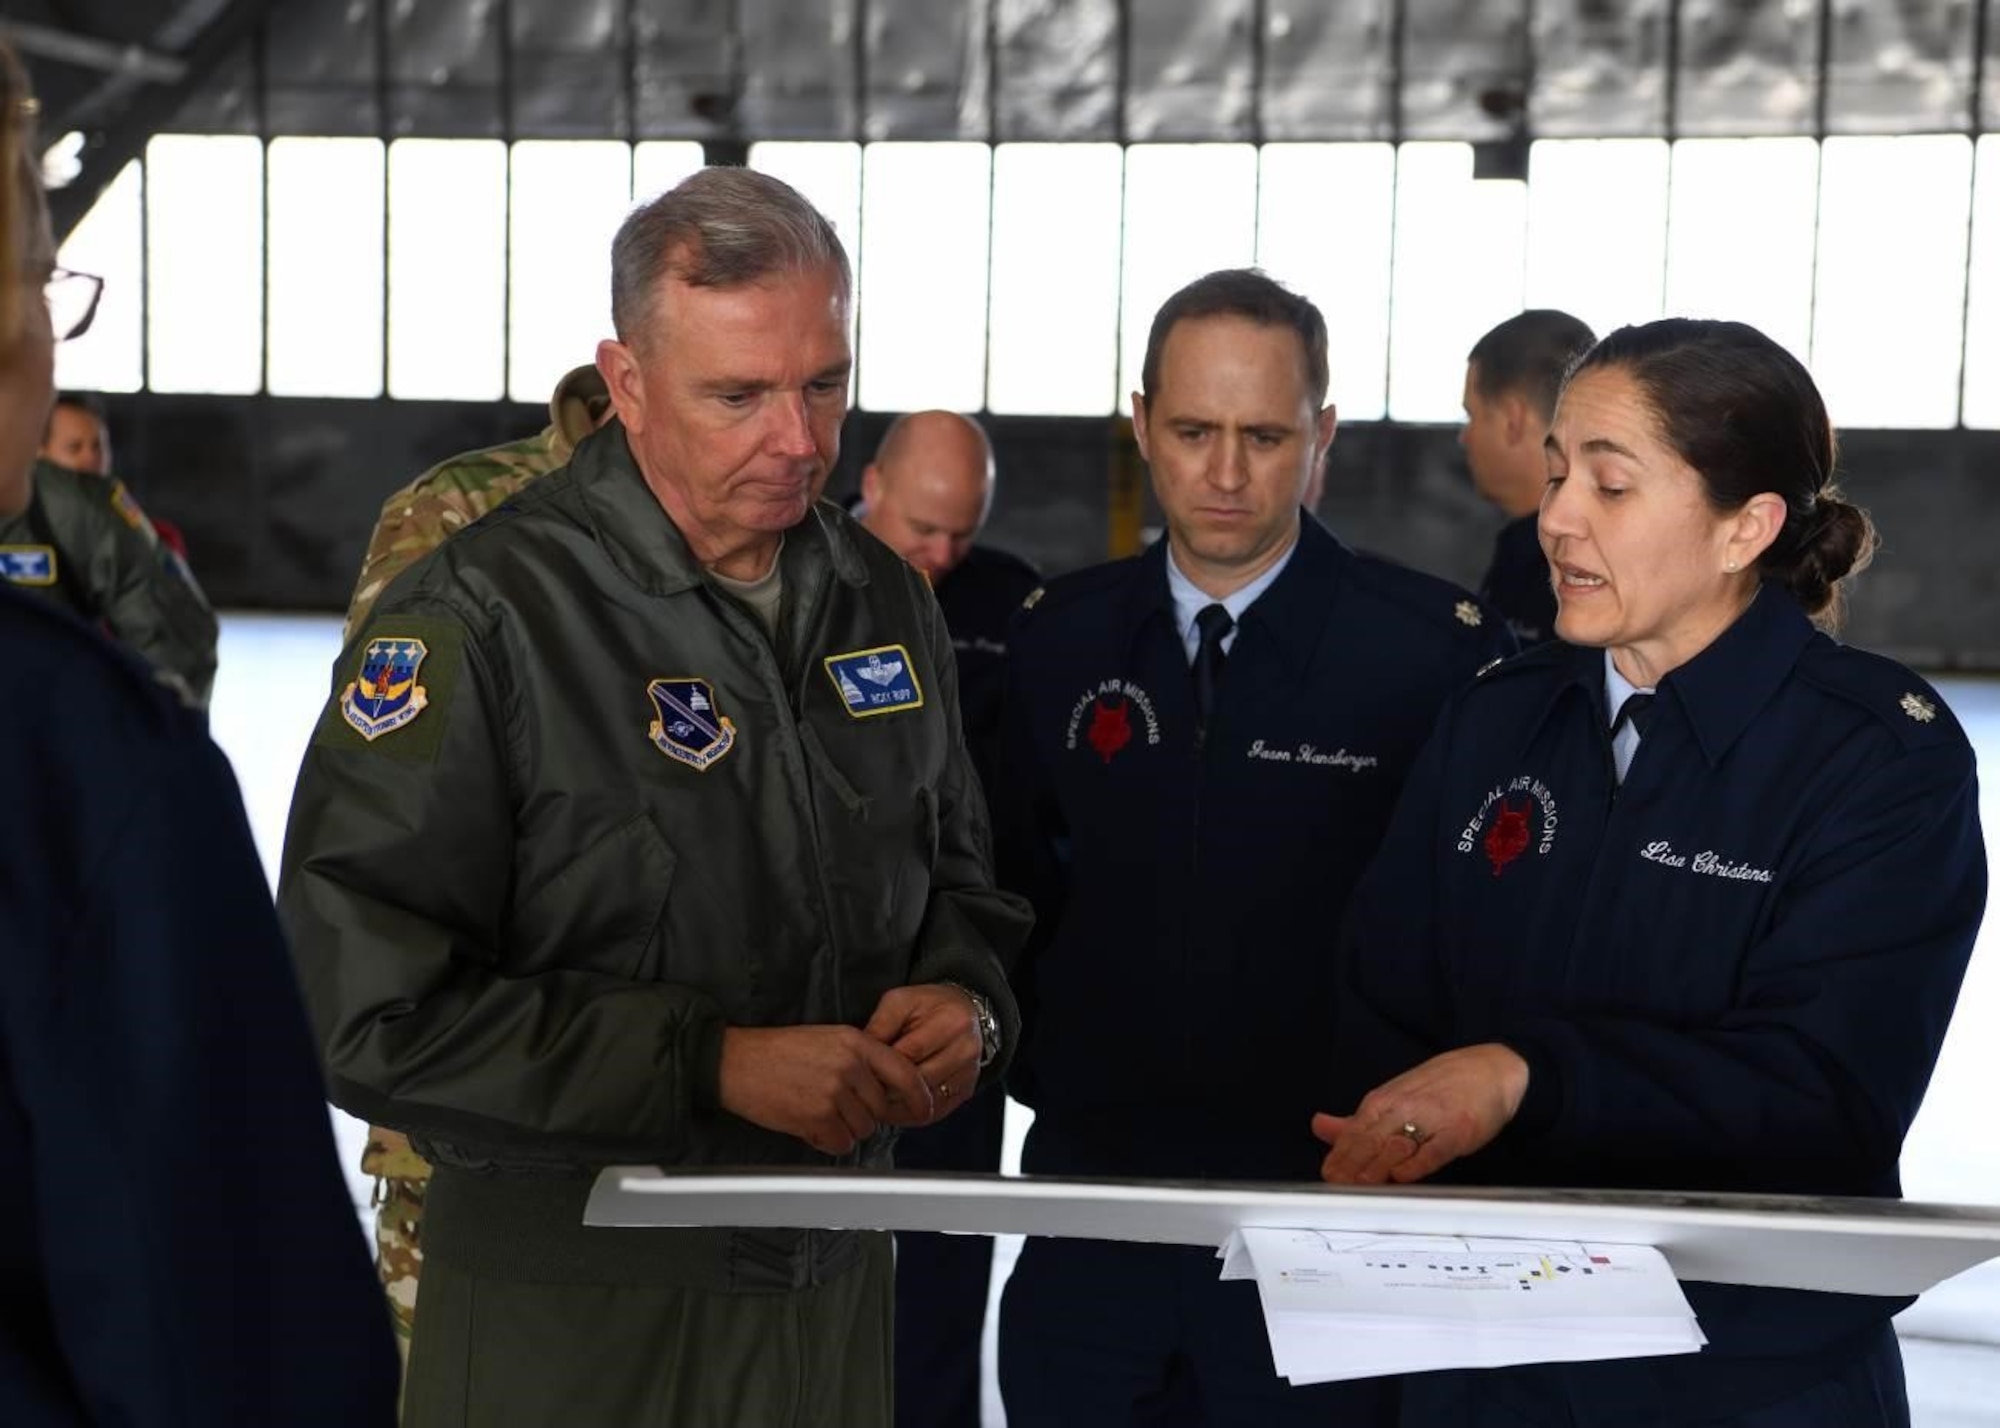 Lt. Col. Lisa Christensen, 89th Operations Support Squadron commander, right, briefs the capabilities of the C-32A aircraft to Maj. Gen. Ricky N. Rupp, Air Force District of Washington and 320th Air Expeditionary Wing commander, left, during an 89th Airlift Wing Immersion Tour on Joint Base Andrews, Maryland, Feb. 28, 2020. During the tour, Rupp, and other leaders of AFDW and the 11th Wing received a wing mission briefing, visited the wing’s communication and aerial port squadrons, and a toured a of the C-32A aircraft. (U.S. Air Force photo by Tech. Sgt. Kentavist P. Brackin)